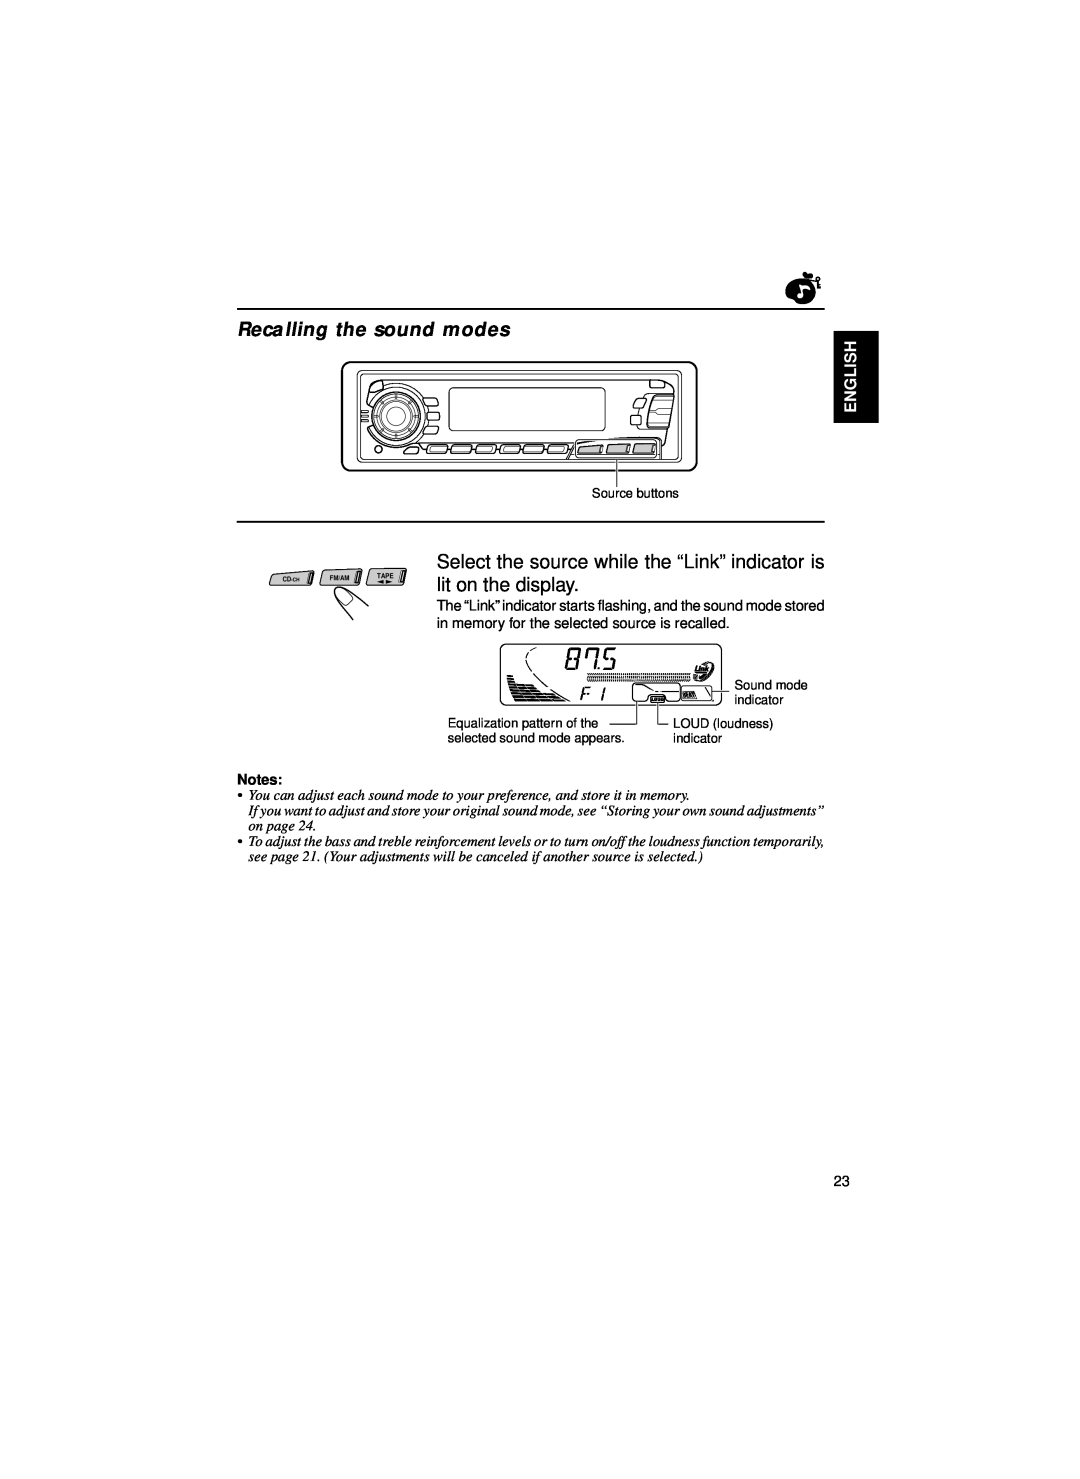 JVC KS-FX835R, KS-FX850R, KS-FX820R, KS-FX834R manual Recalling the sound modes, English, Notes 